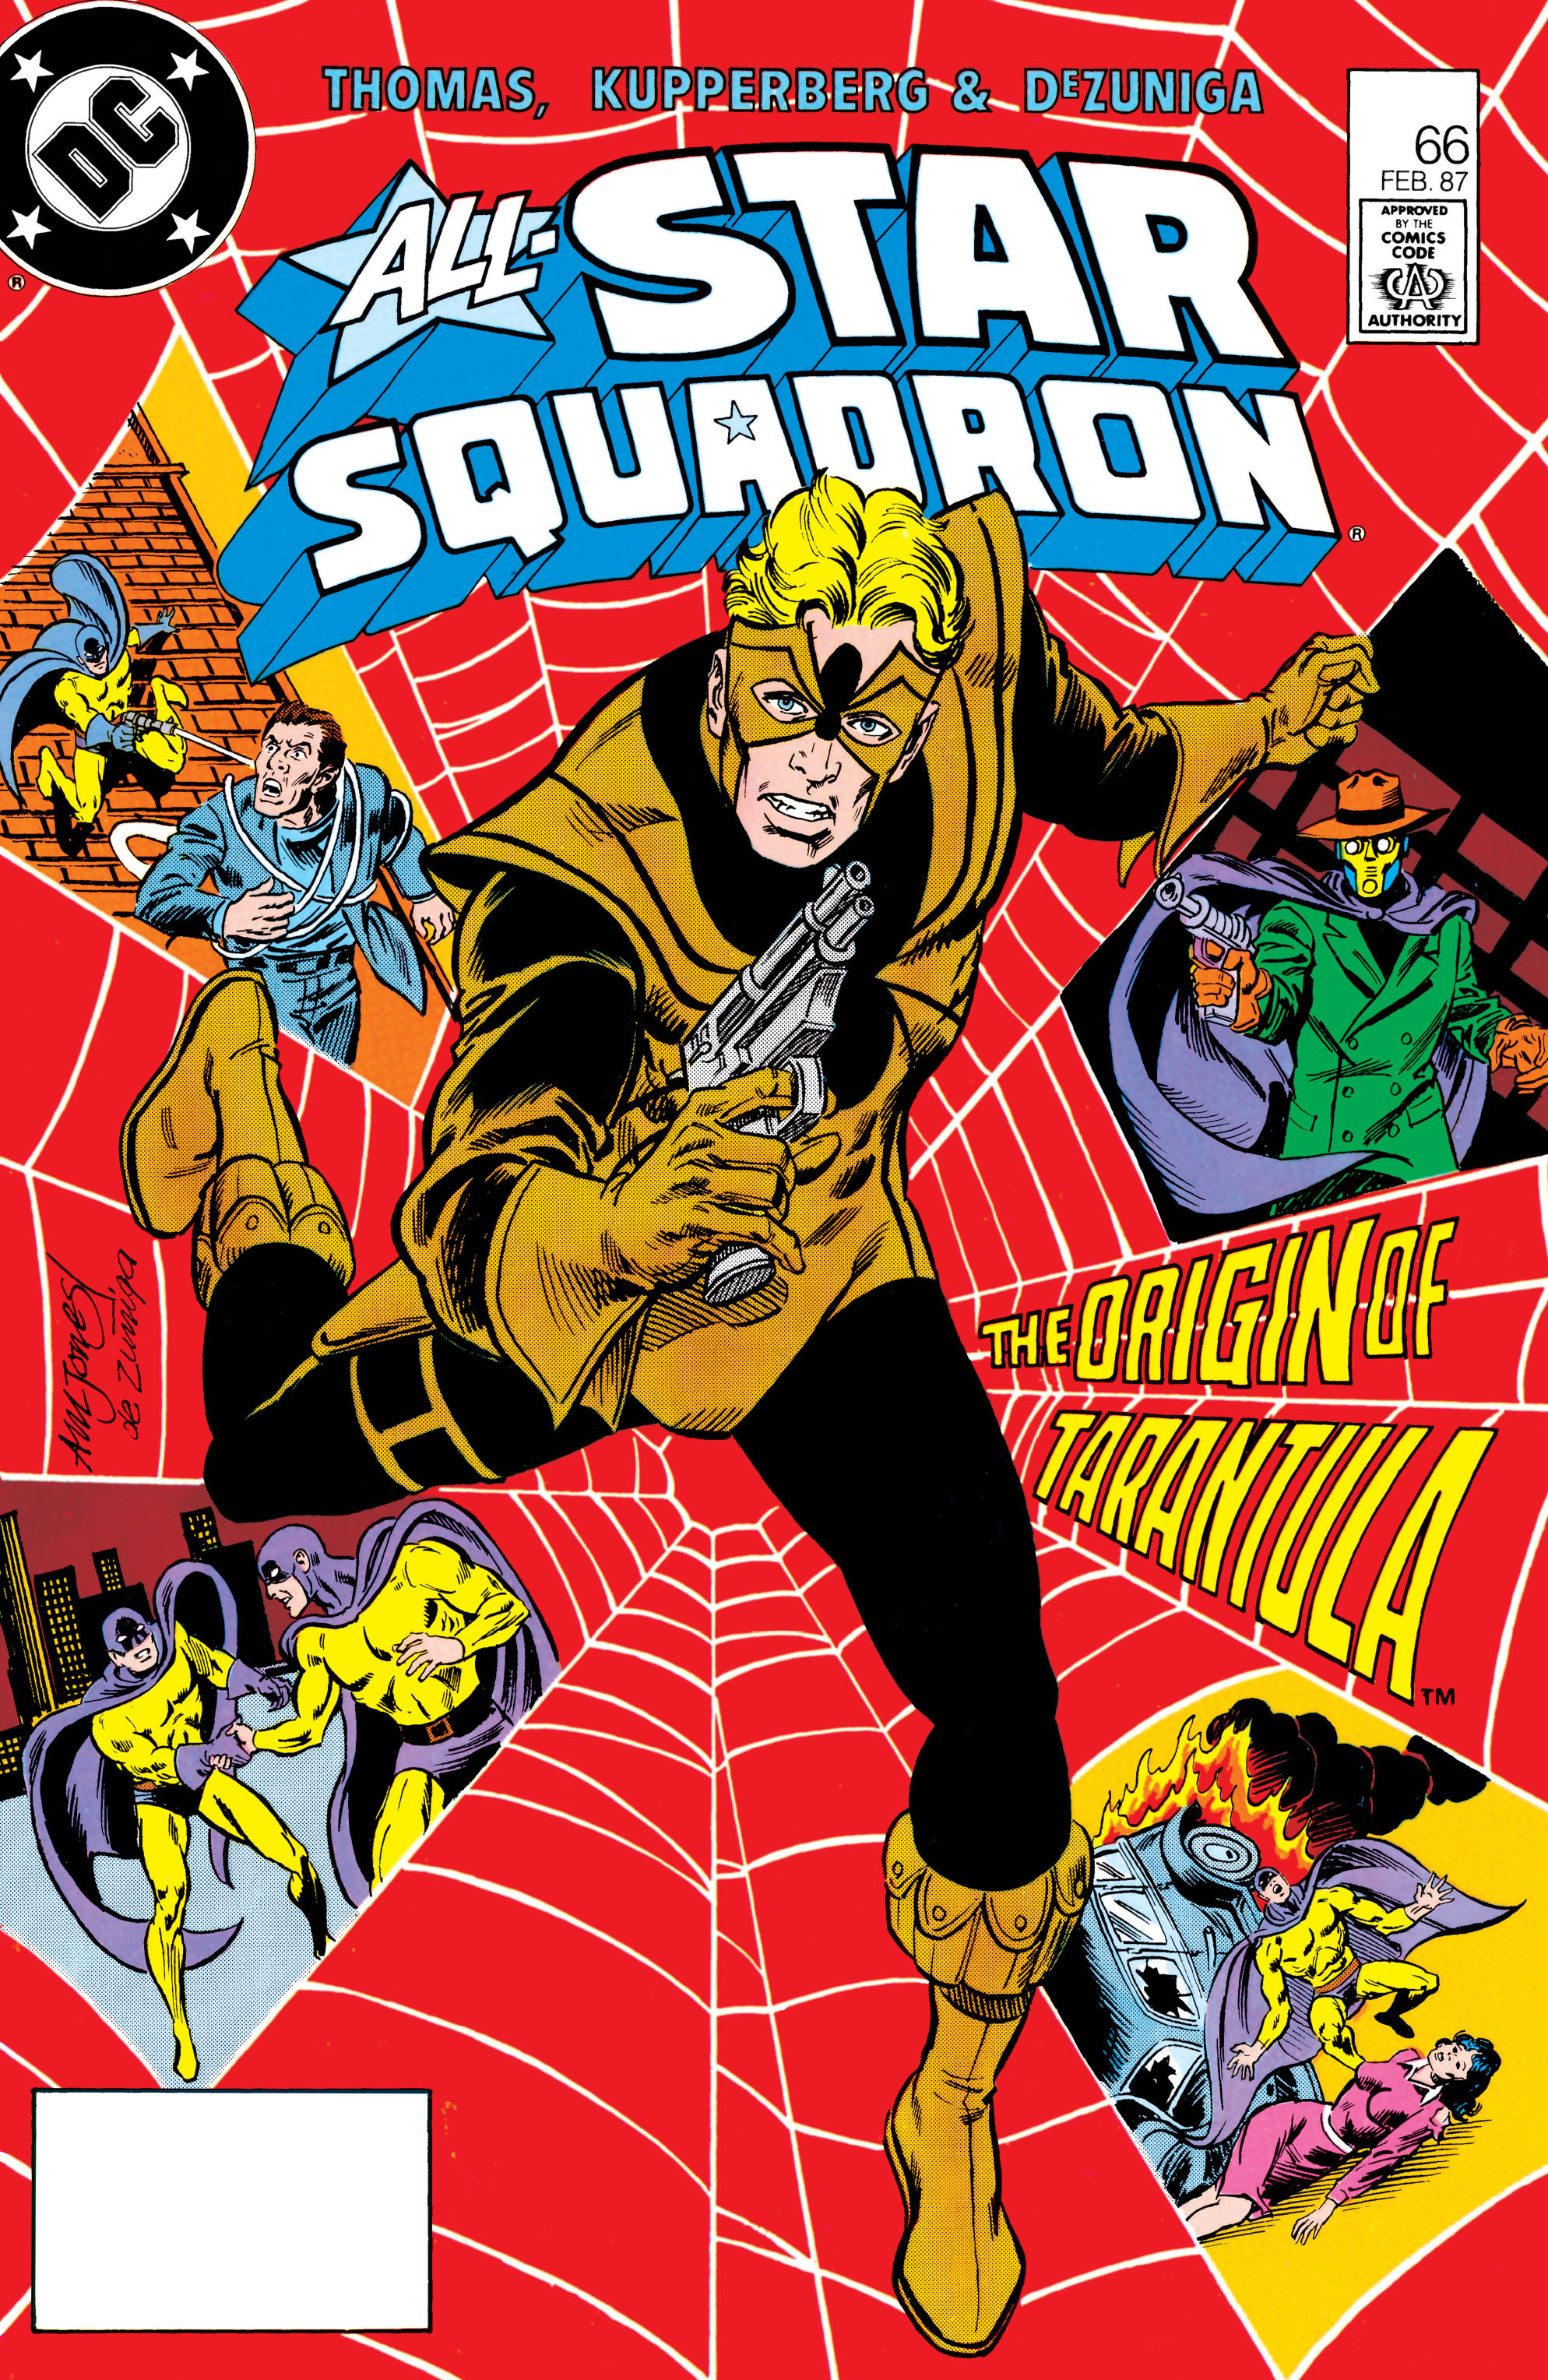 Read online All-Star Squadron comic -  Issue #66 - 1